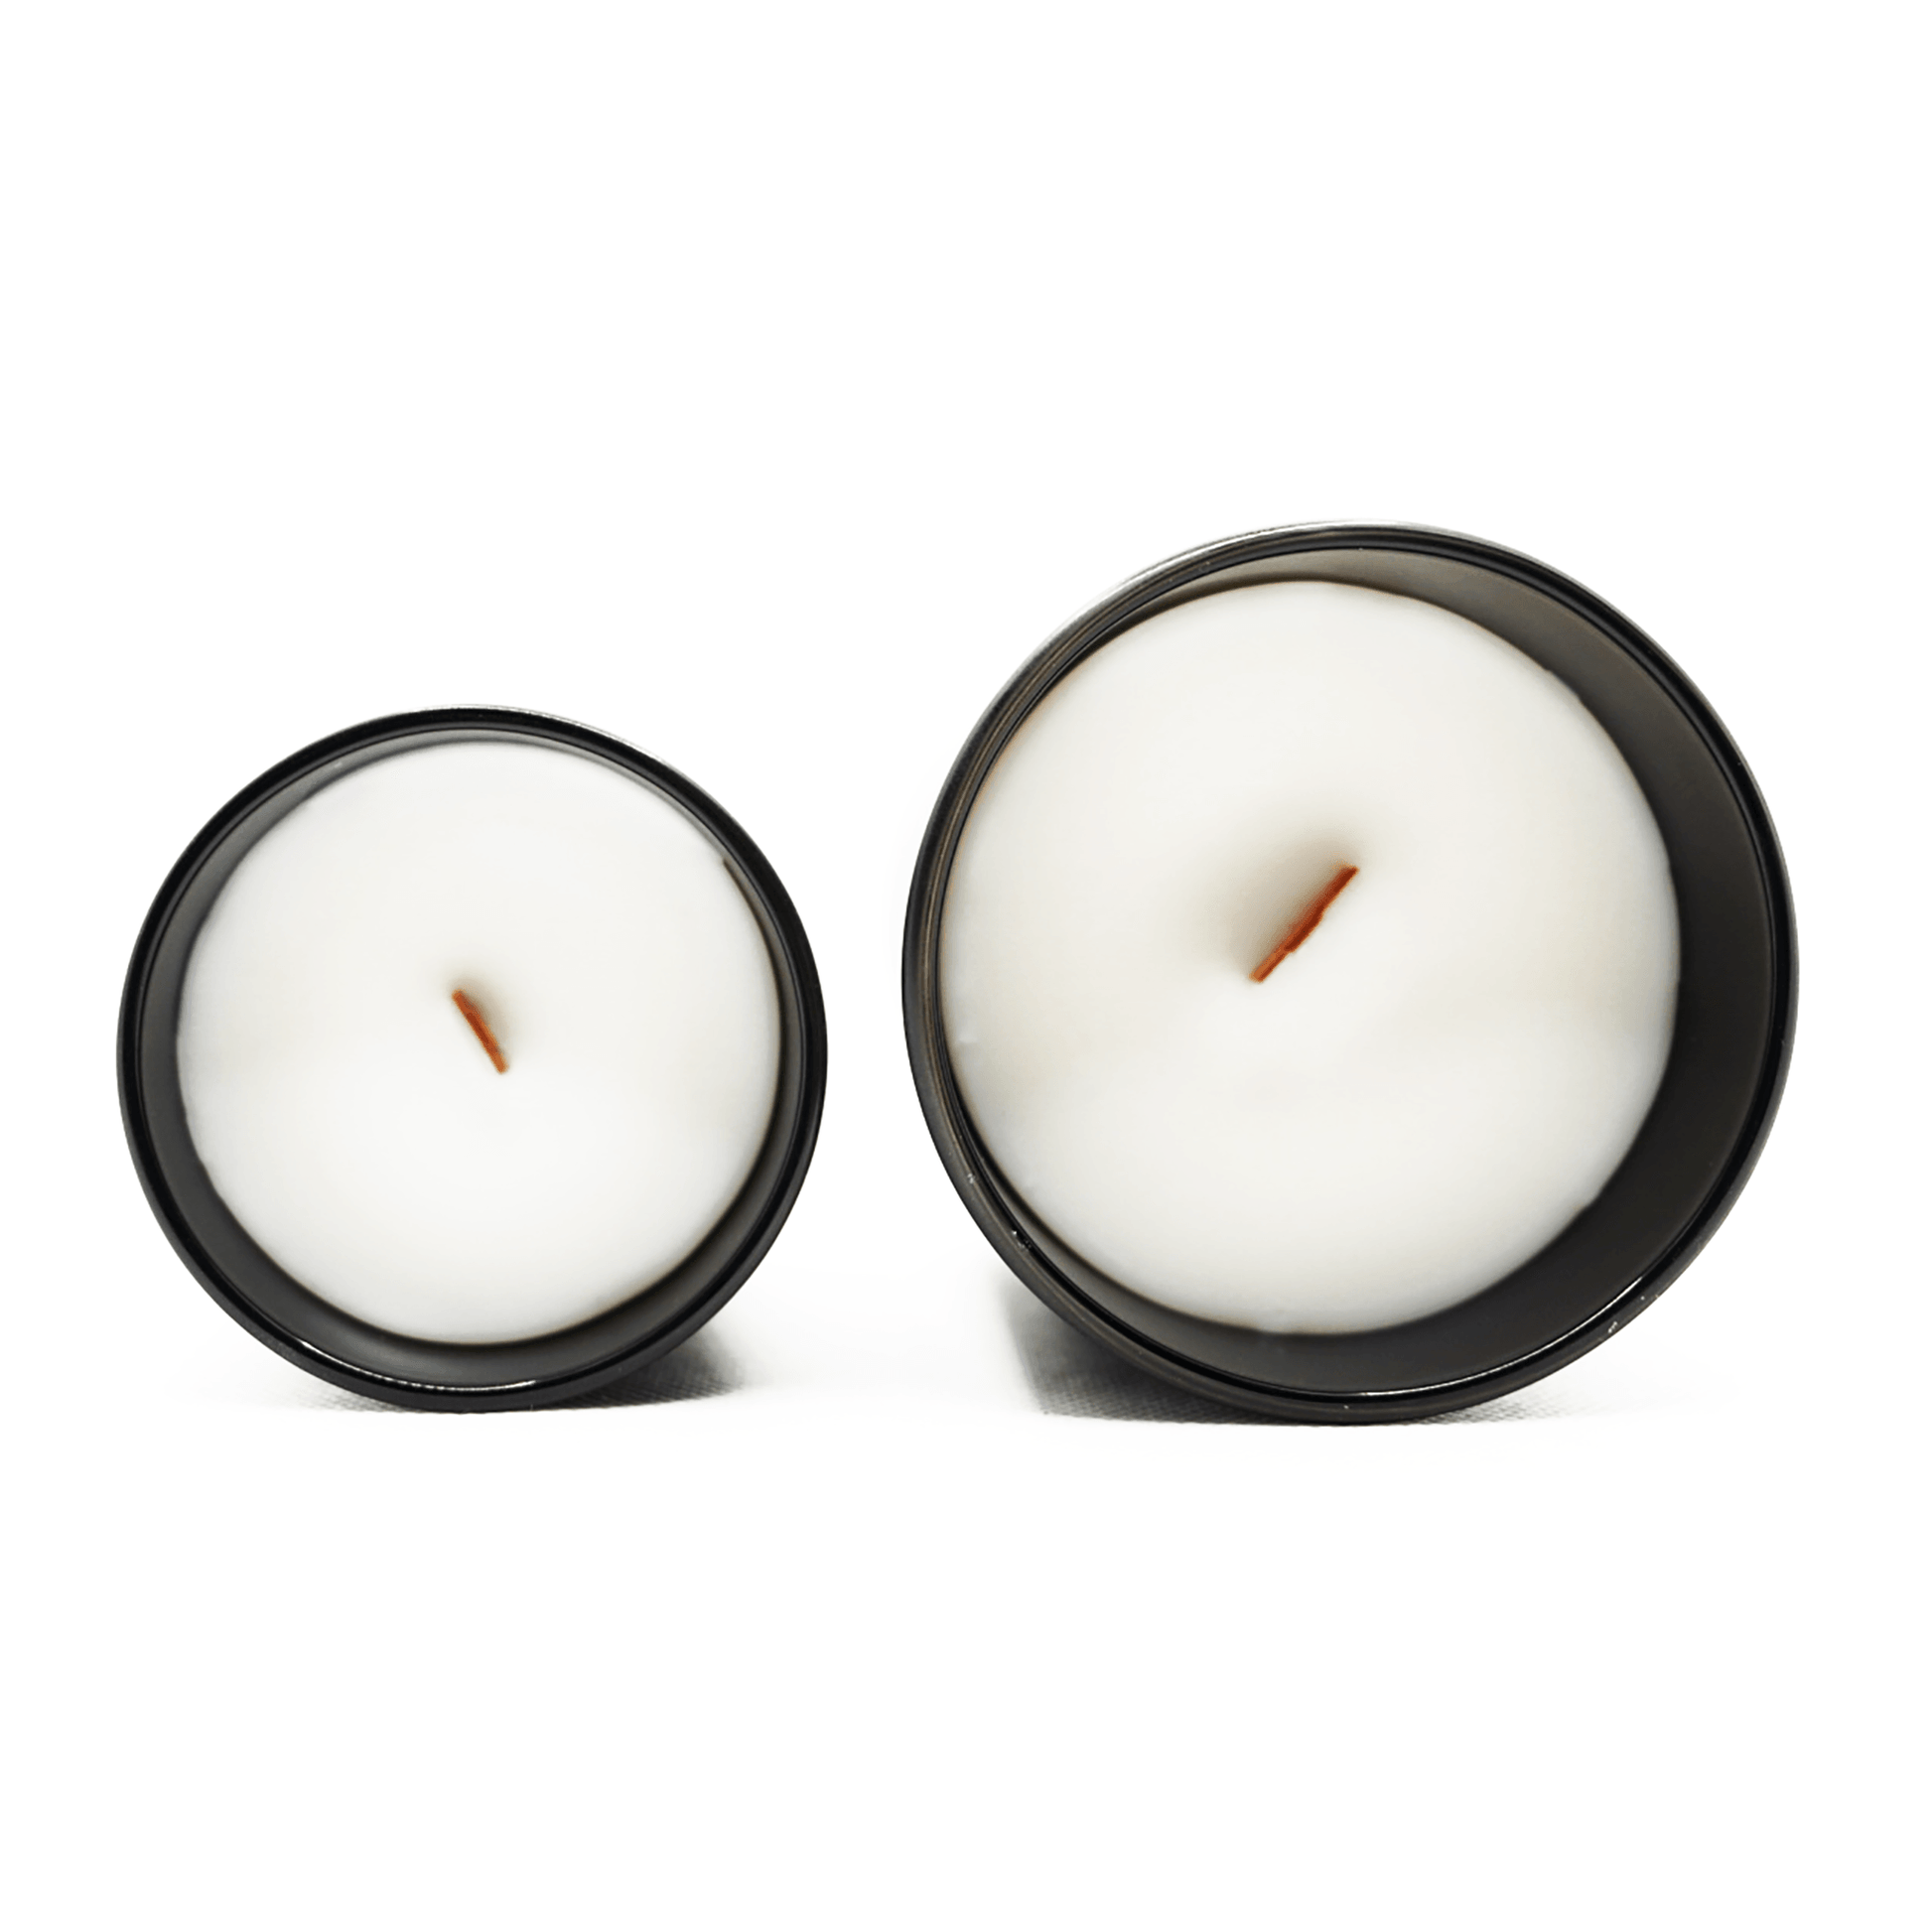 Time Is Money - Woodwick Candle - BADWAX